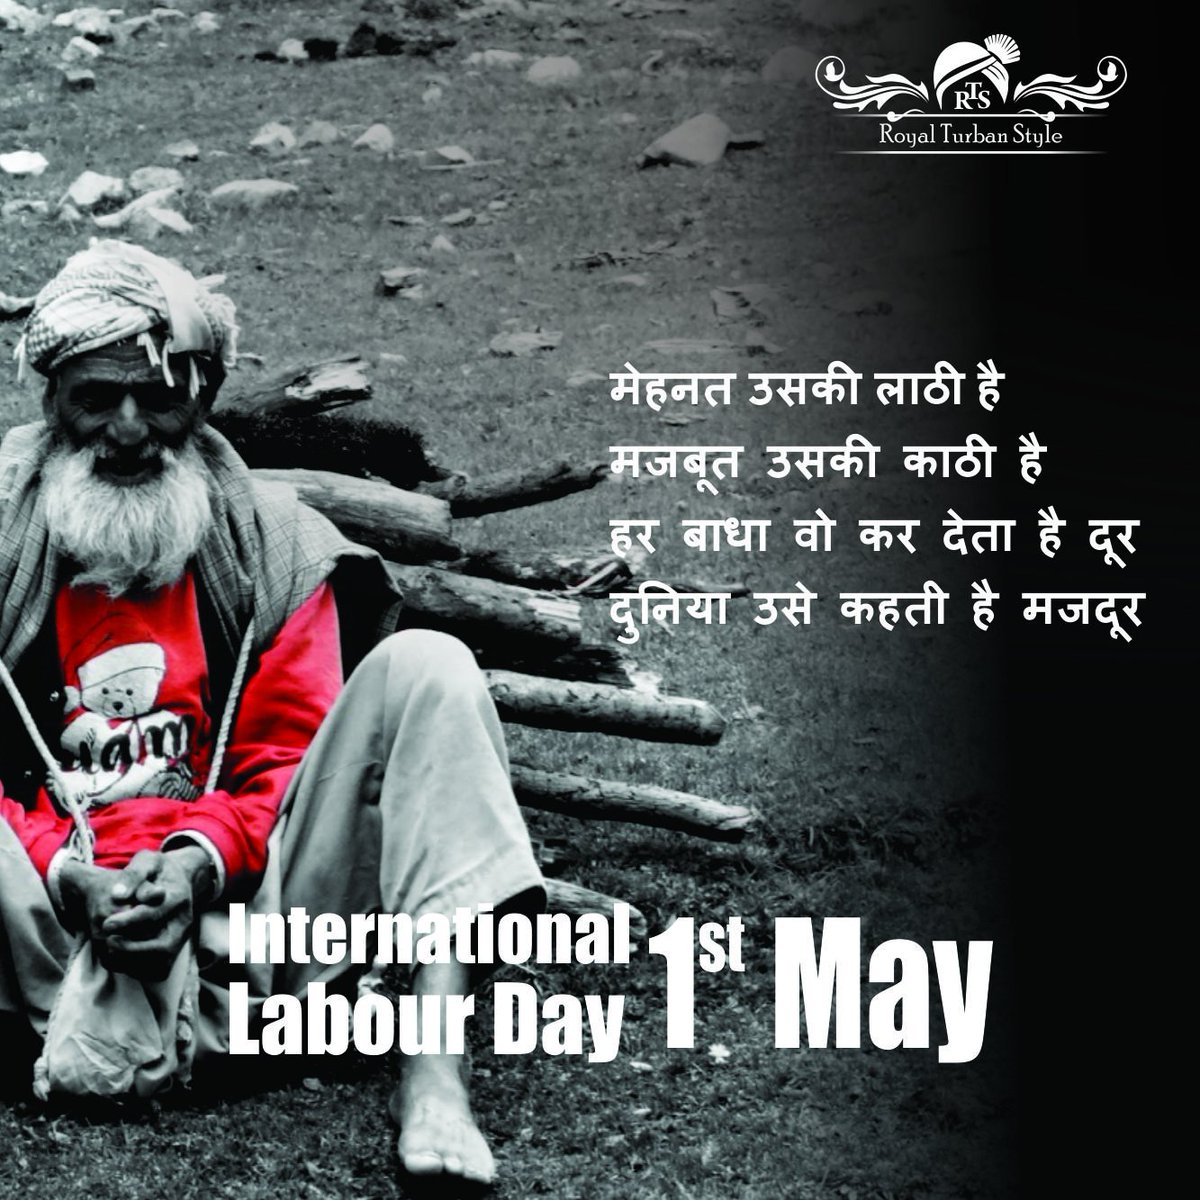 Royal Turban Style wishes you all - ' Happy Labour Day '
Let us Salute🙏 the vigour they put in.

#LabourDay #workers #1May2019 #salute #hardwork #workerday #proud #feelproud #hindustankishaan #motherindia #internationalworkerday #internationallabourday #strongpersonality